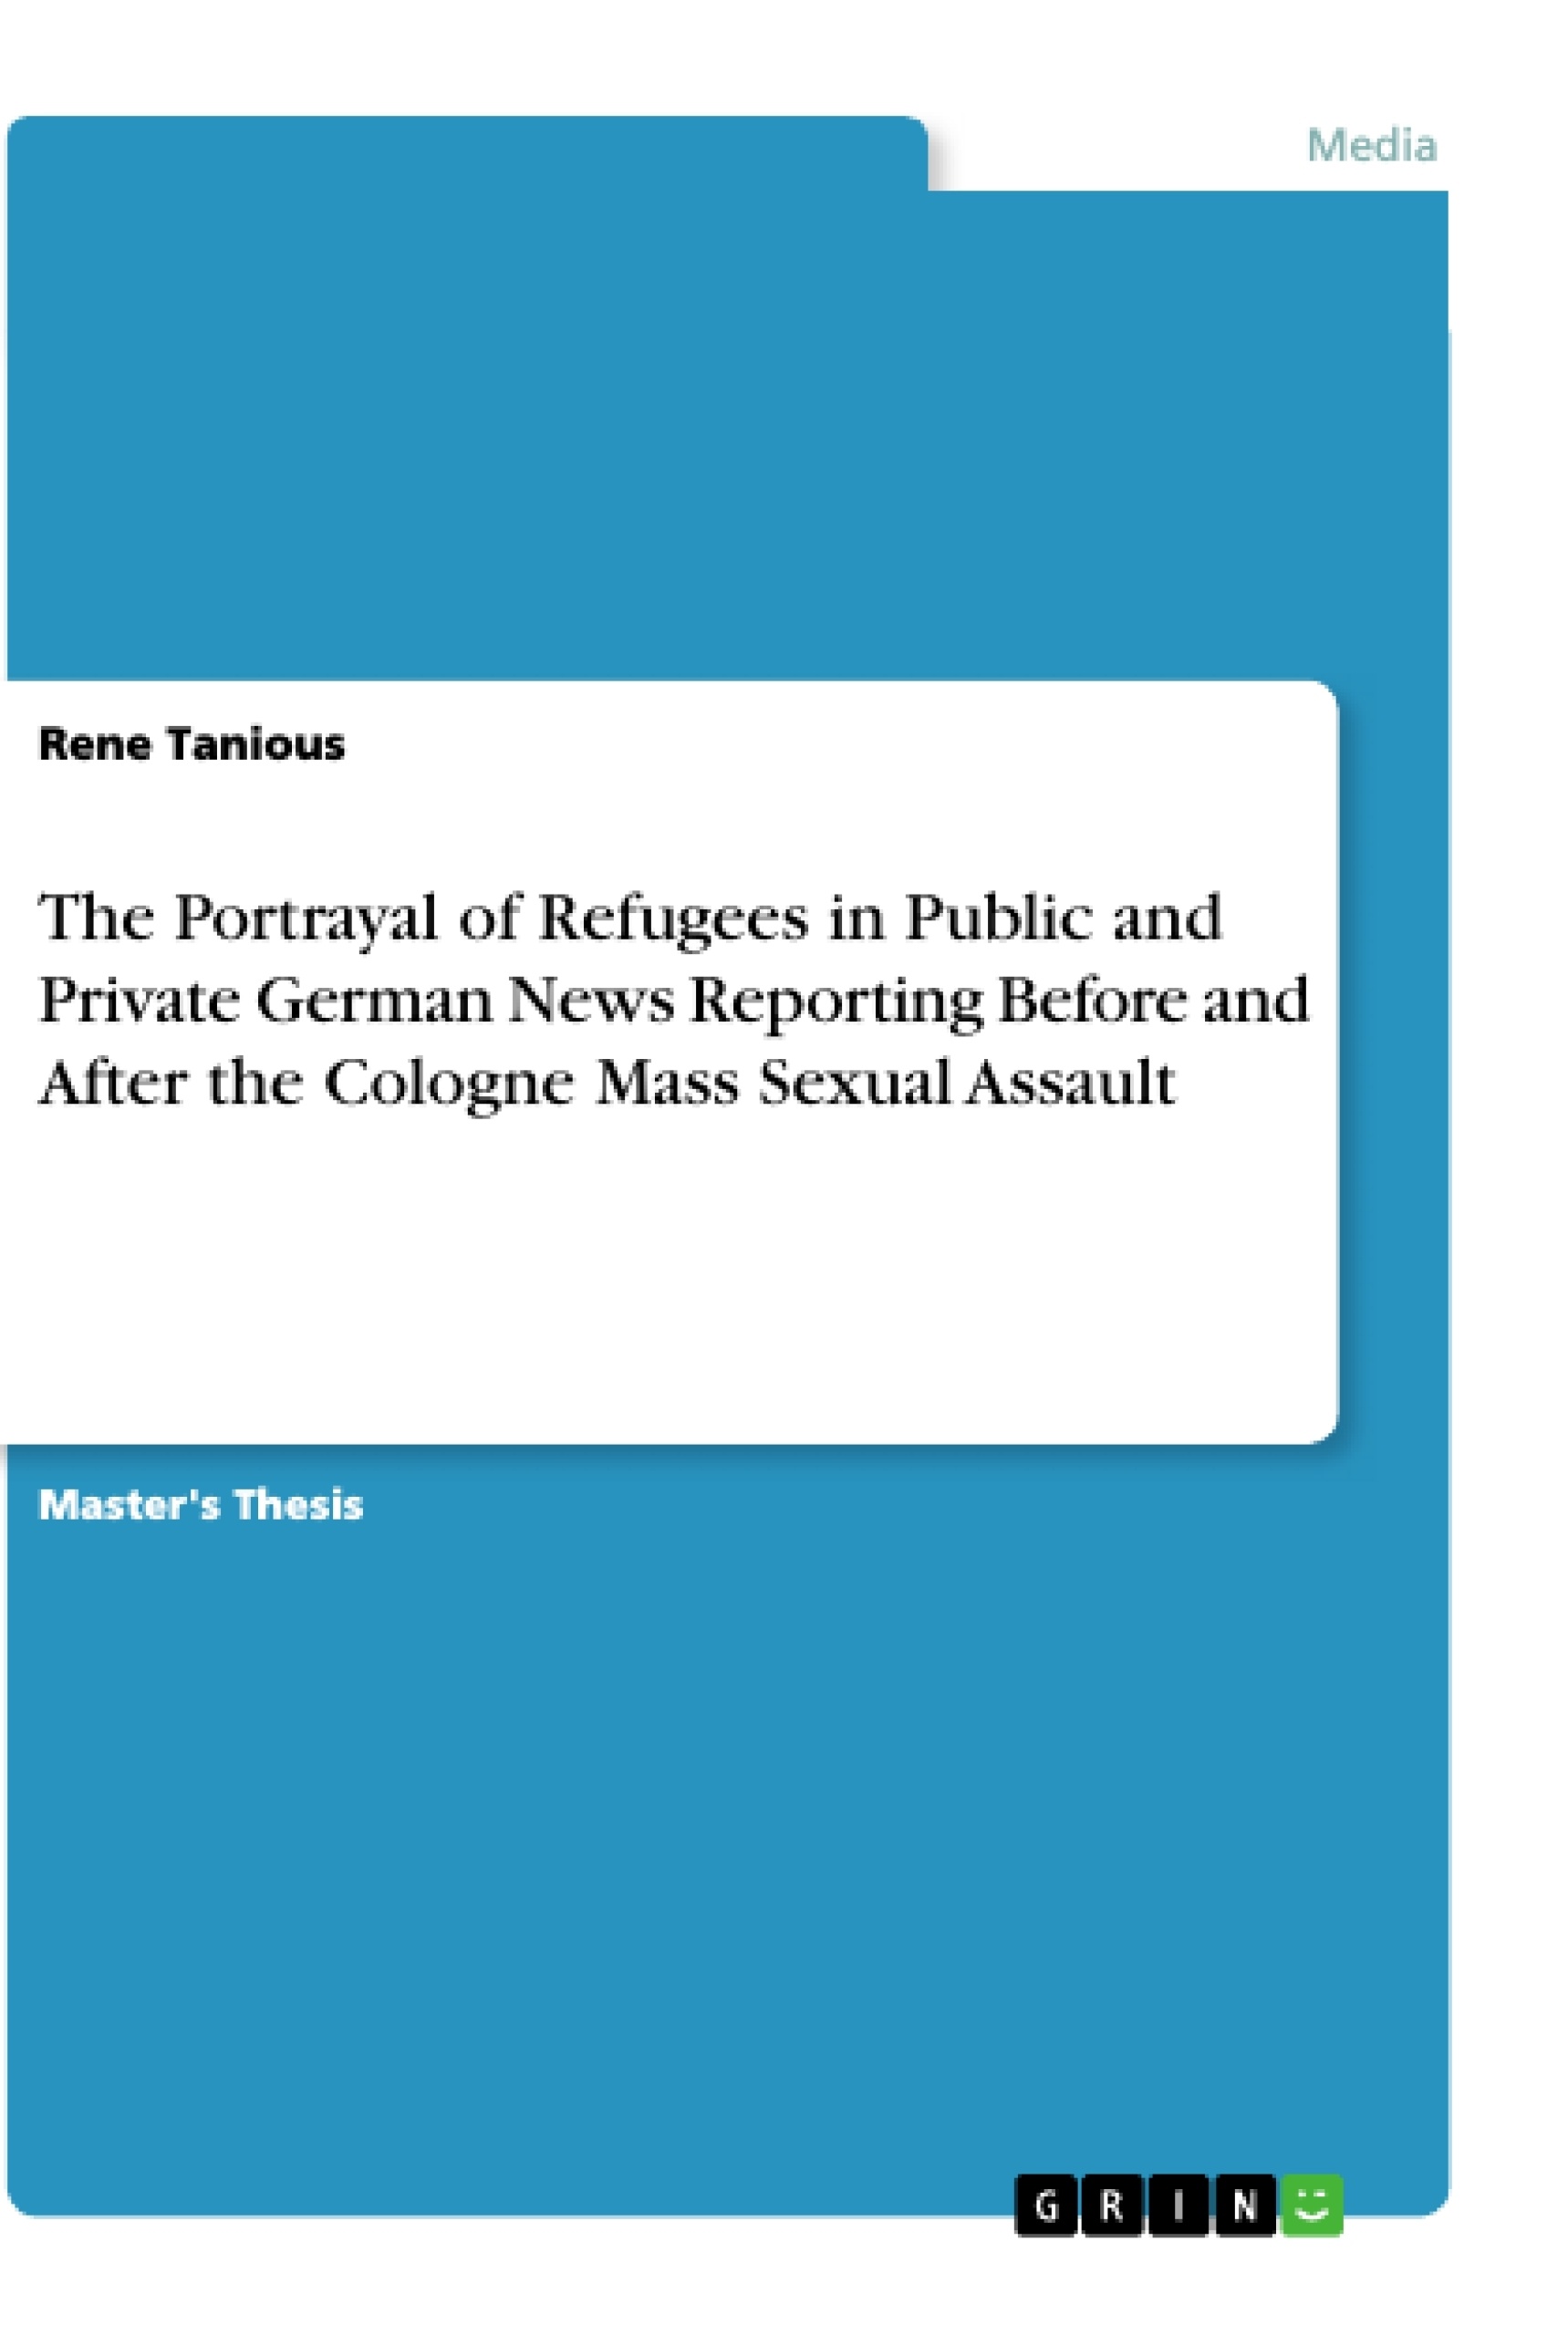 Title: The Portrayal of Refugees in Public and Private German News Reporting Before and After the Cologne Mass Sexual Assault